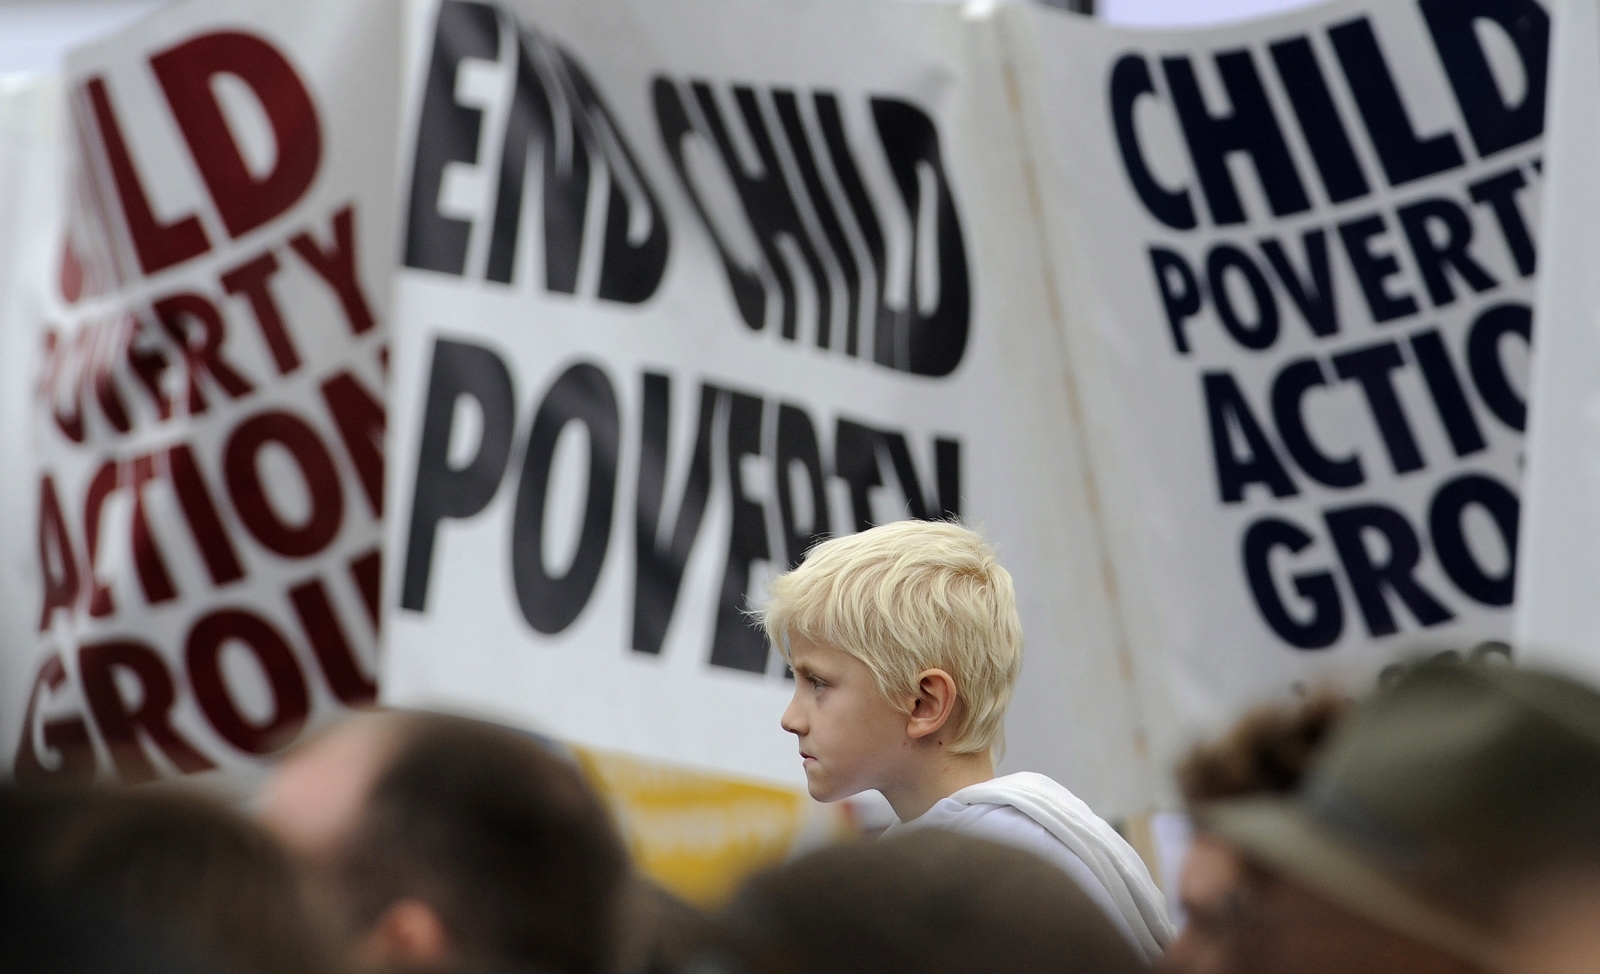 Cost Of Living Uk 300000 More People In Absolute Poverty Than Official Figures Imply 